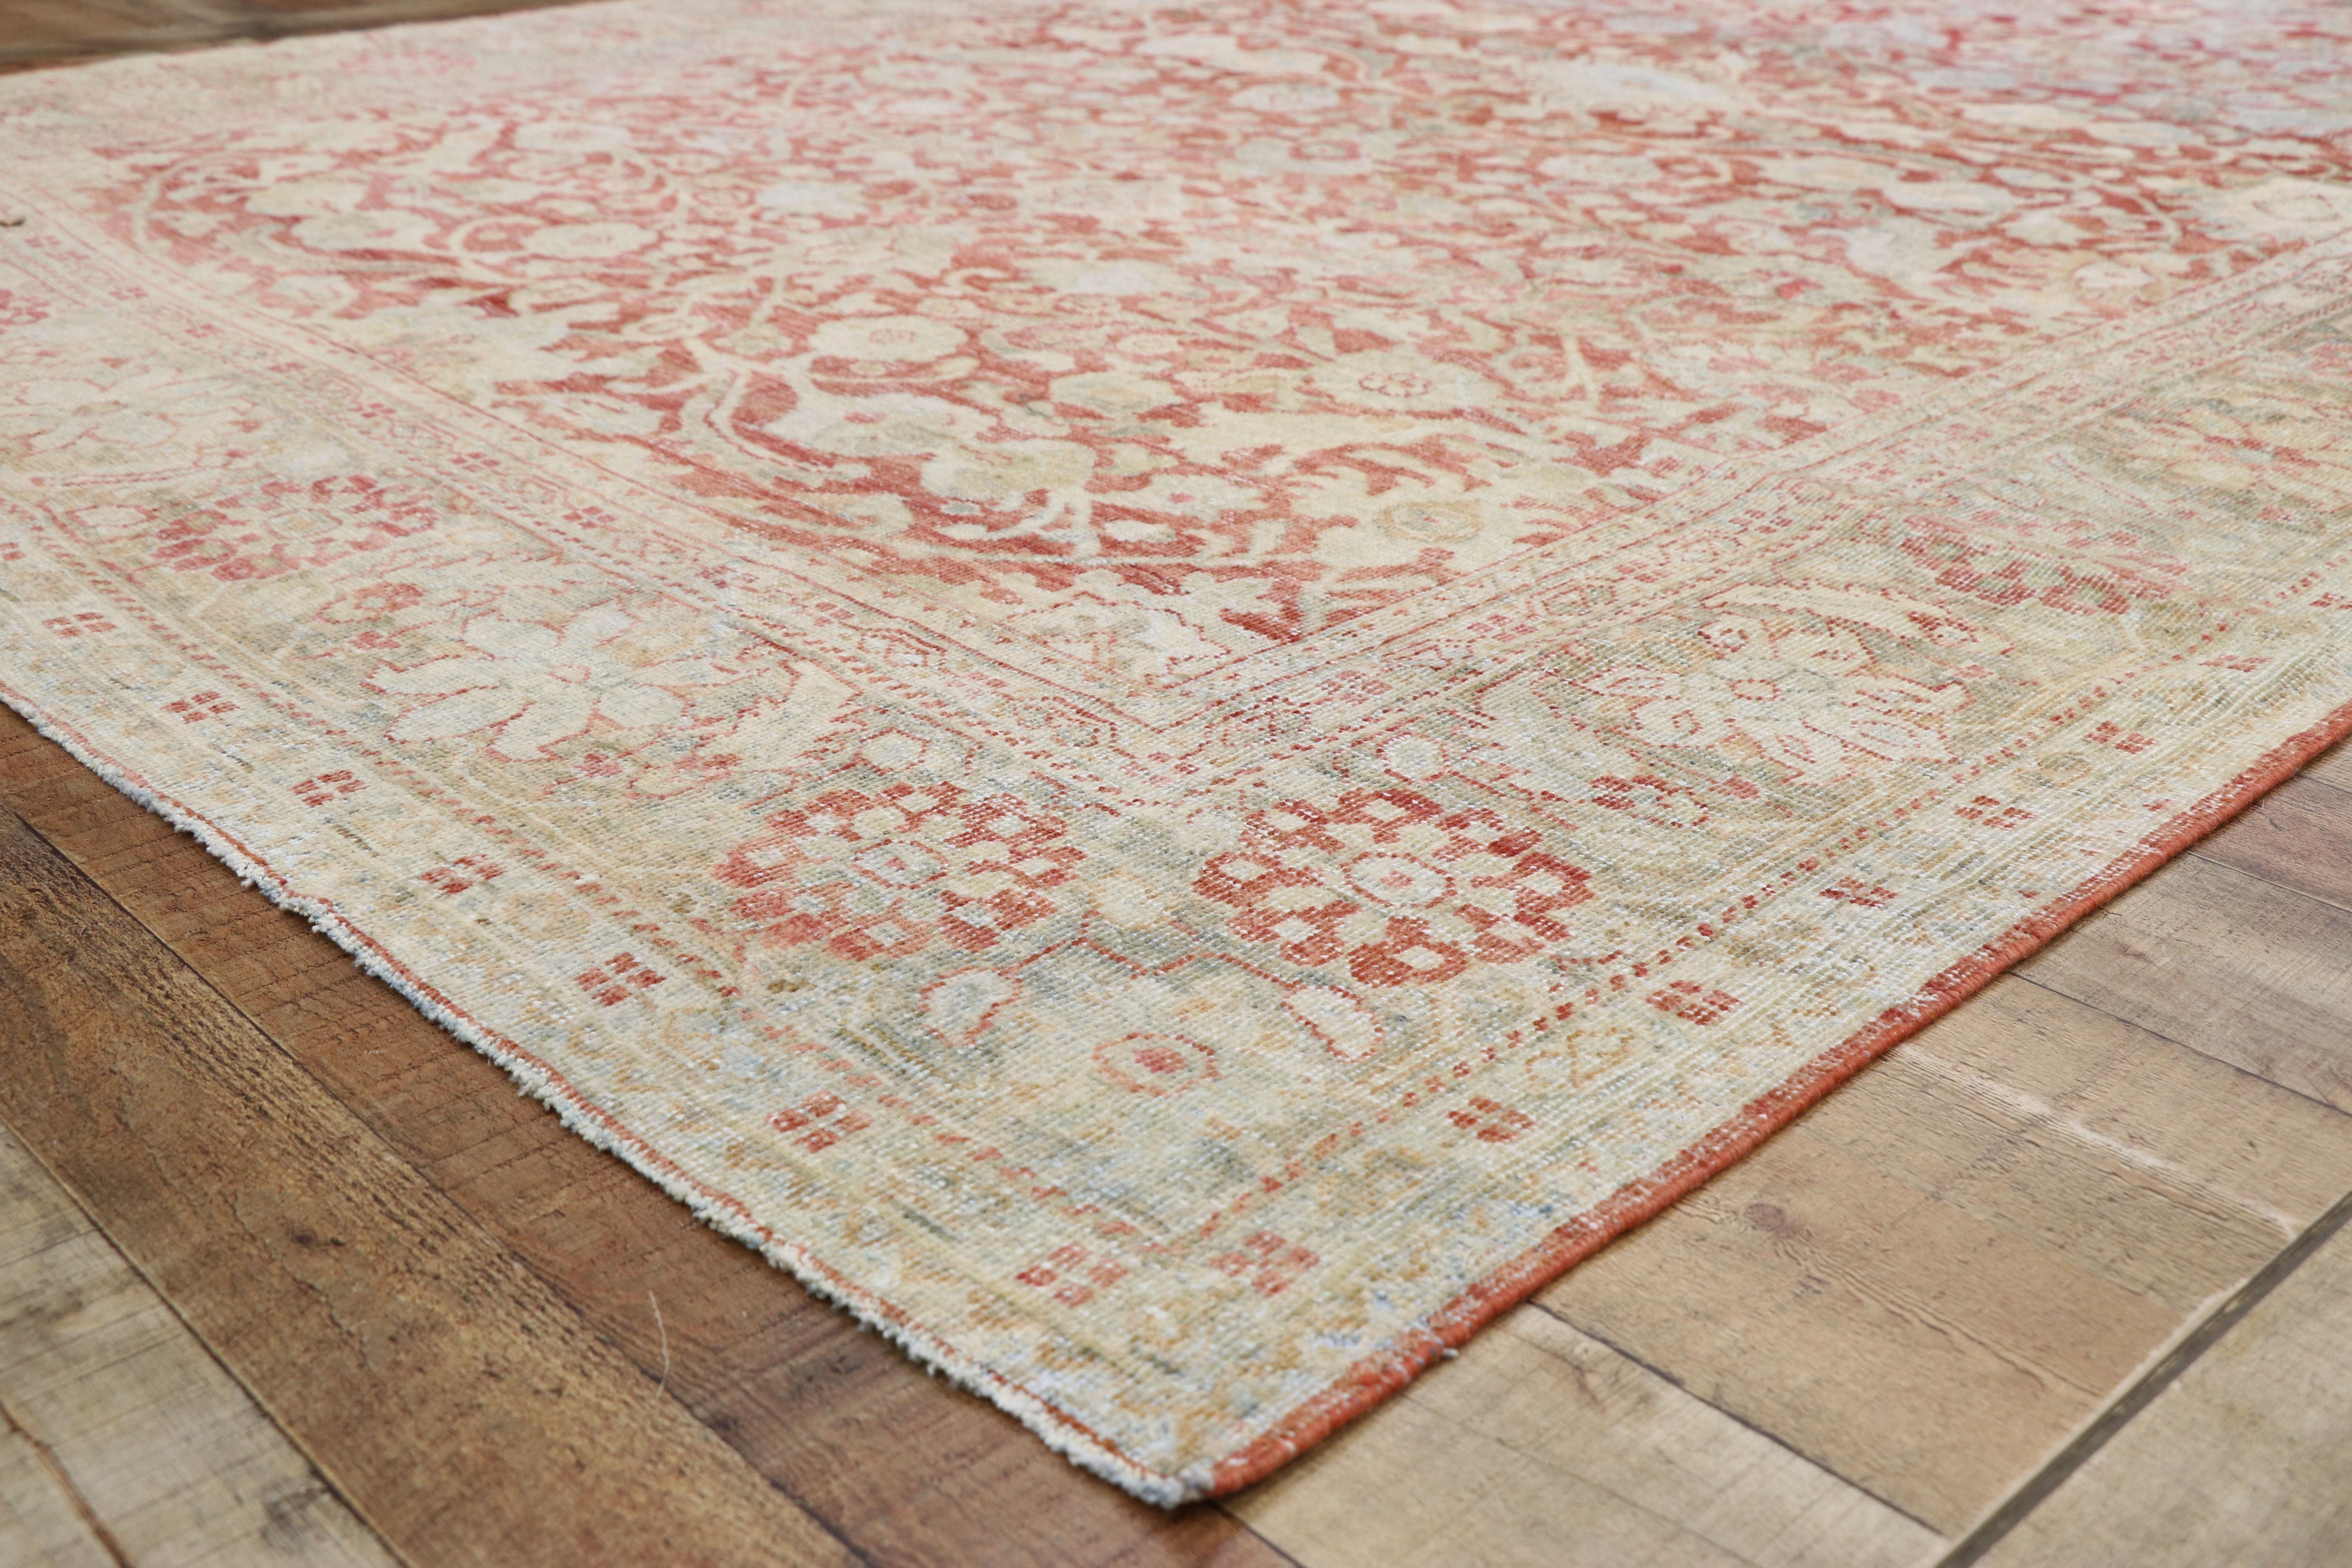 20th Century Distressed Antique Persian Mahal Design Rug with Relaxed Federal Style For Sale